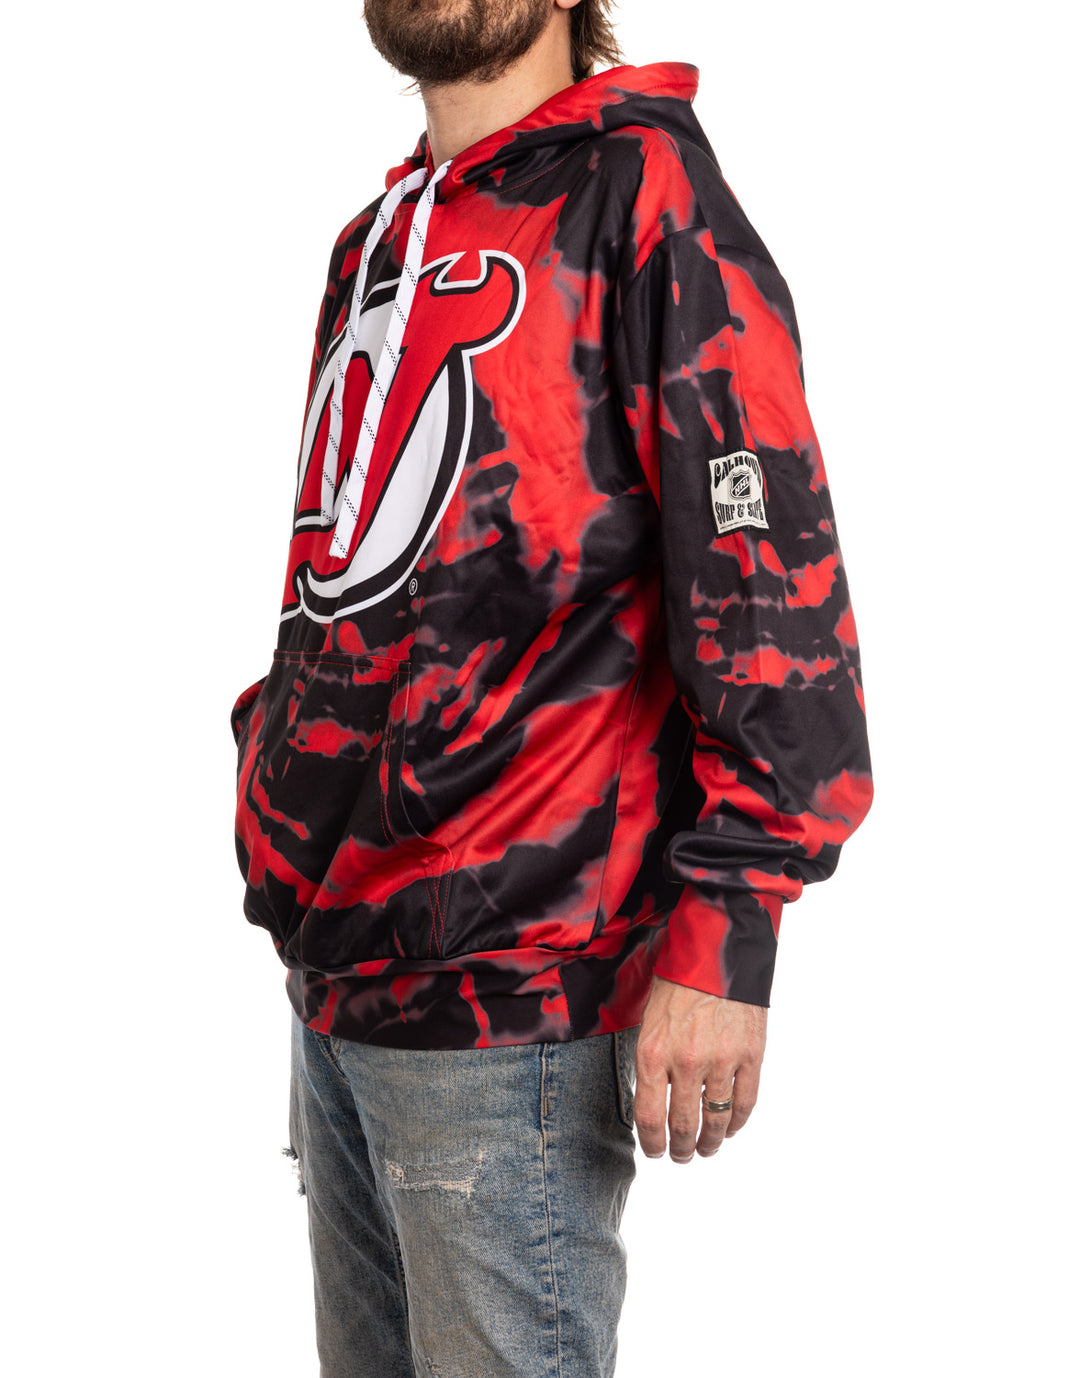 New Jersey Devils Sublimation Hoodie